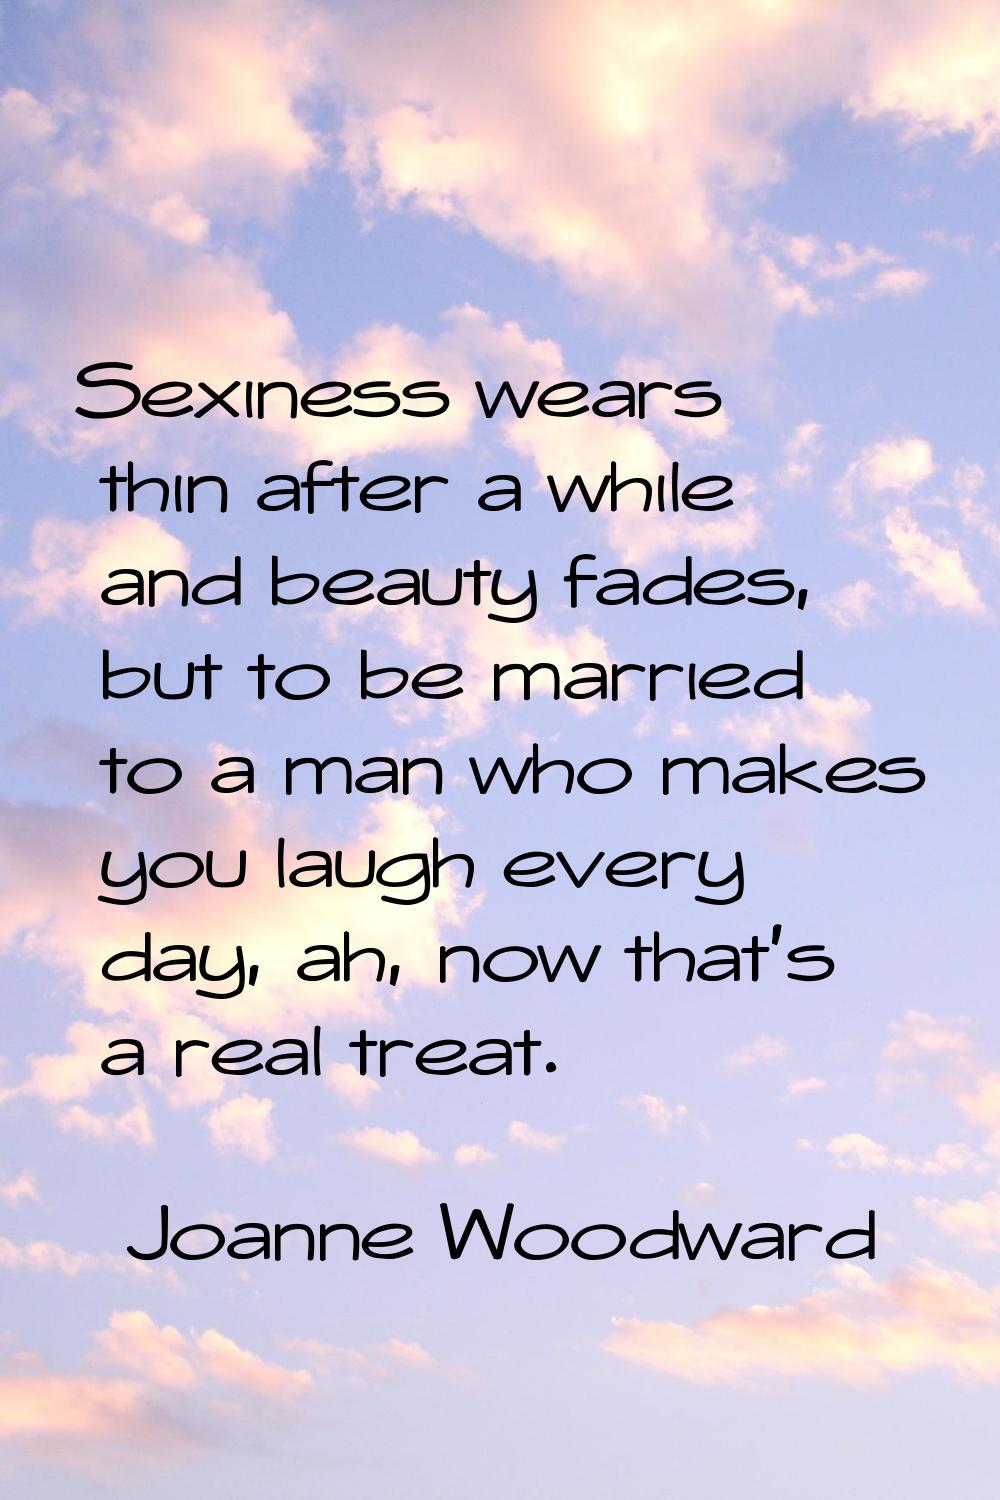 Sexiness wears thin after a while and beauty fades, but to be married to a man who makes you laugh 